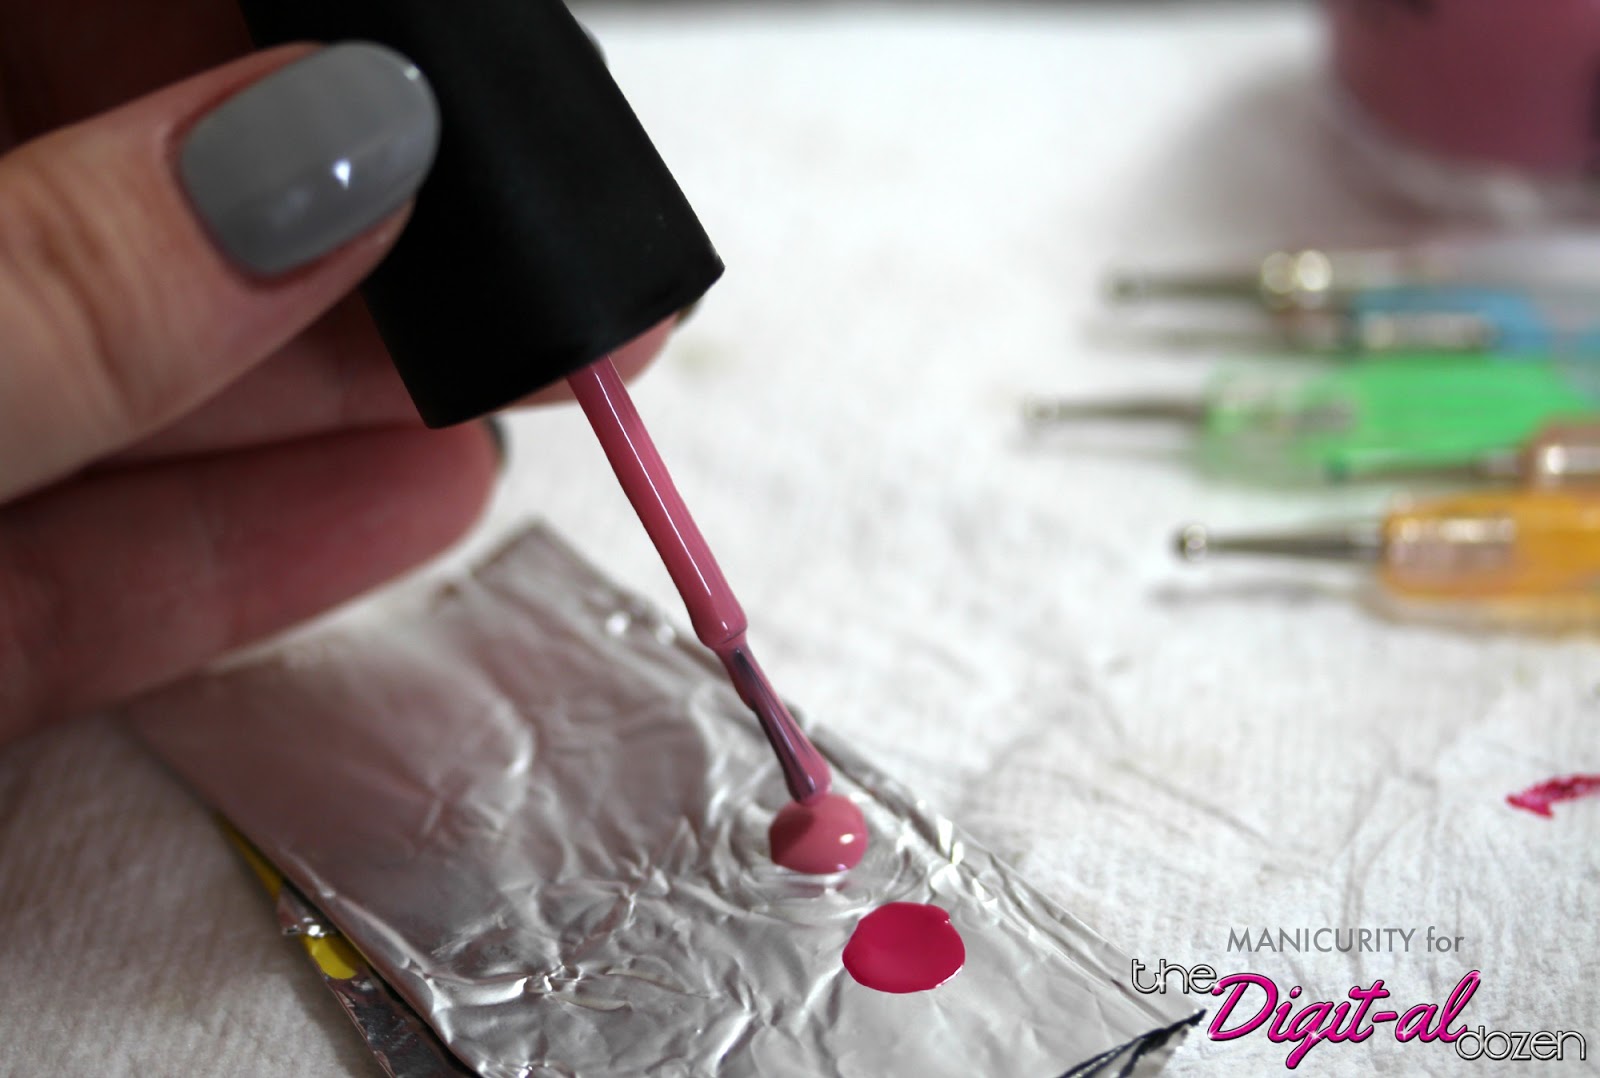 Dotting Tools 101: The Definitive Guide to Getting Dotty - How to Use Dotting Tools for Nail Art (Tips, Tutorial) by Manicurity for The Digital Dozen